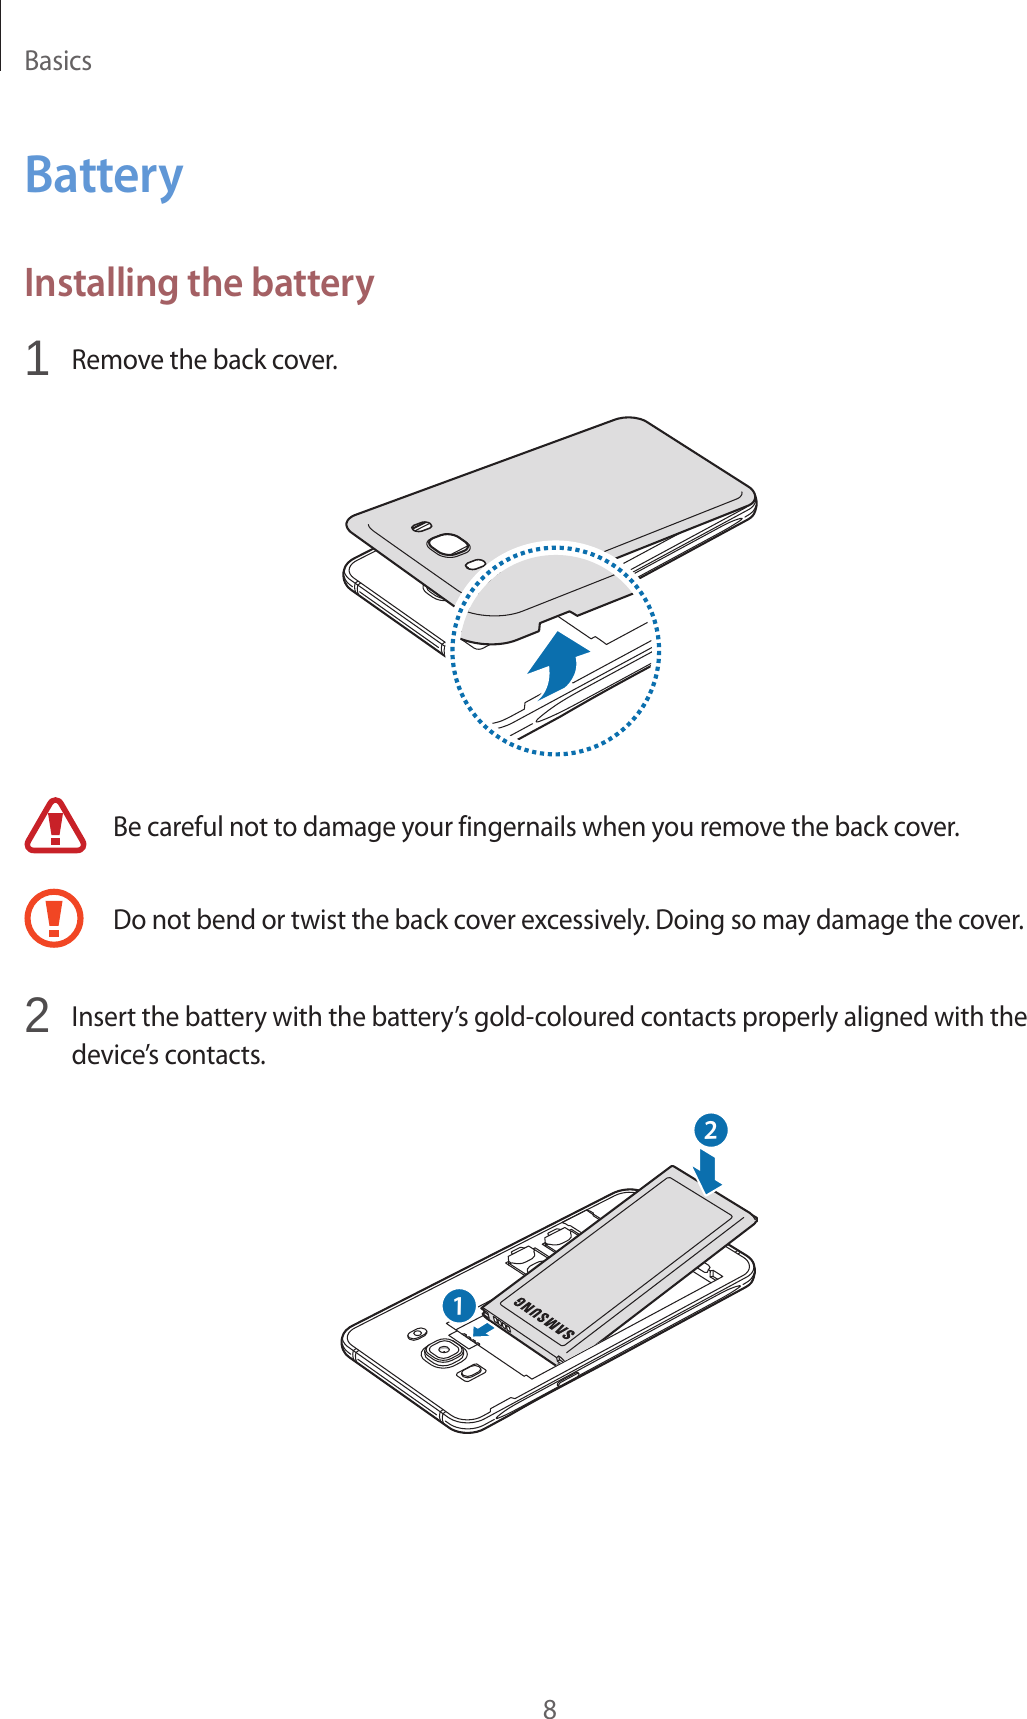 Basics8BatteryInstalling the battery1  Remove the back cover.Be careful not to damage your fingernails when you remove the back cover.Do not bend or twist the back cover excessively. Doing so may damage the cover.2  Insert the battery with the battery’s gold-coloured contacts properly aligned with the device’s contacts.21